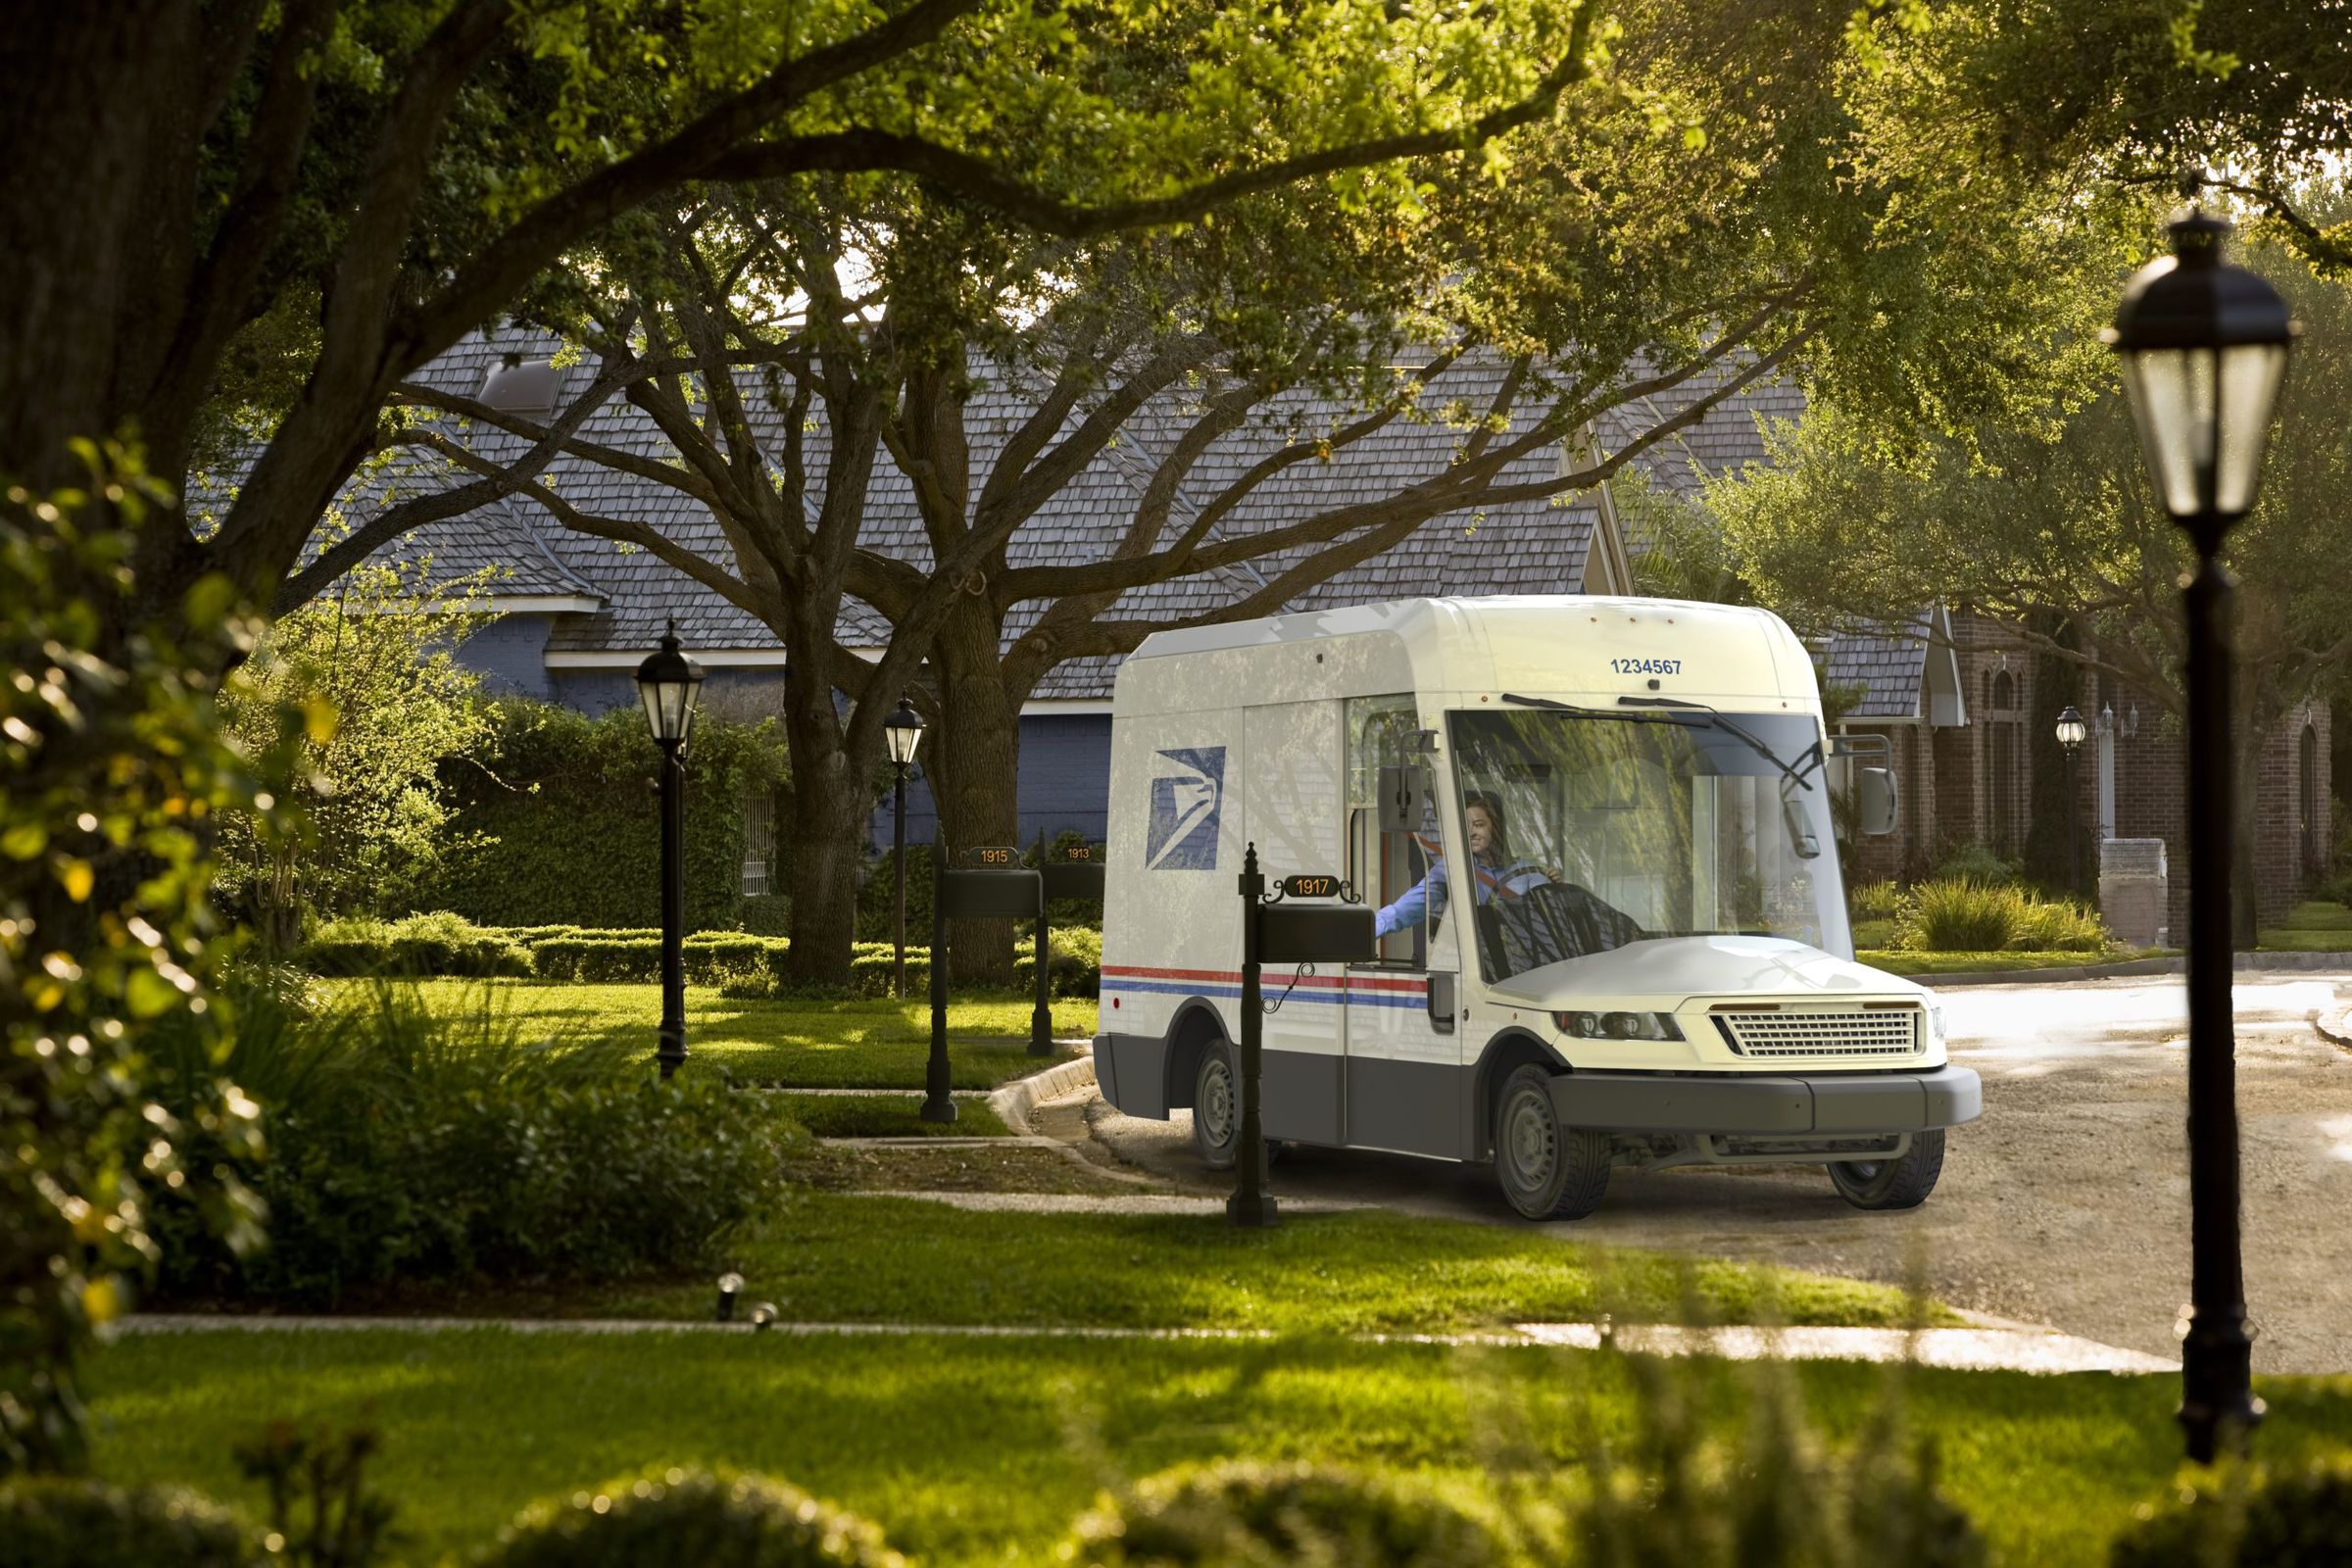 In a lush green suburban neighborhood, a friendly USPS white truck with a new design that has a huge windshield and low to the ground hood is by a driveway delivering letters.